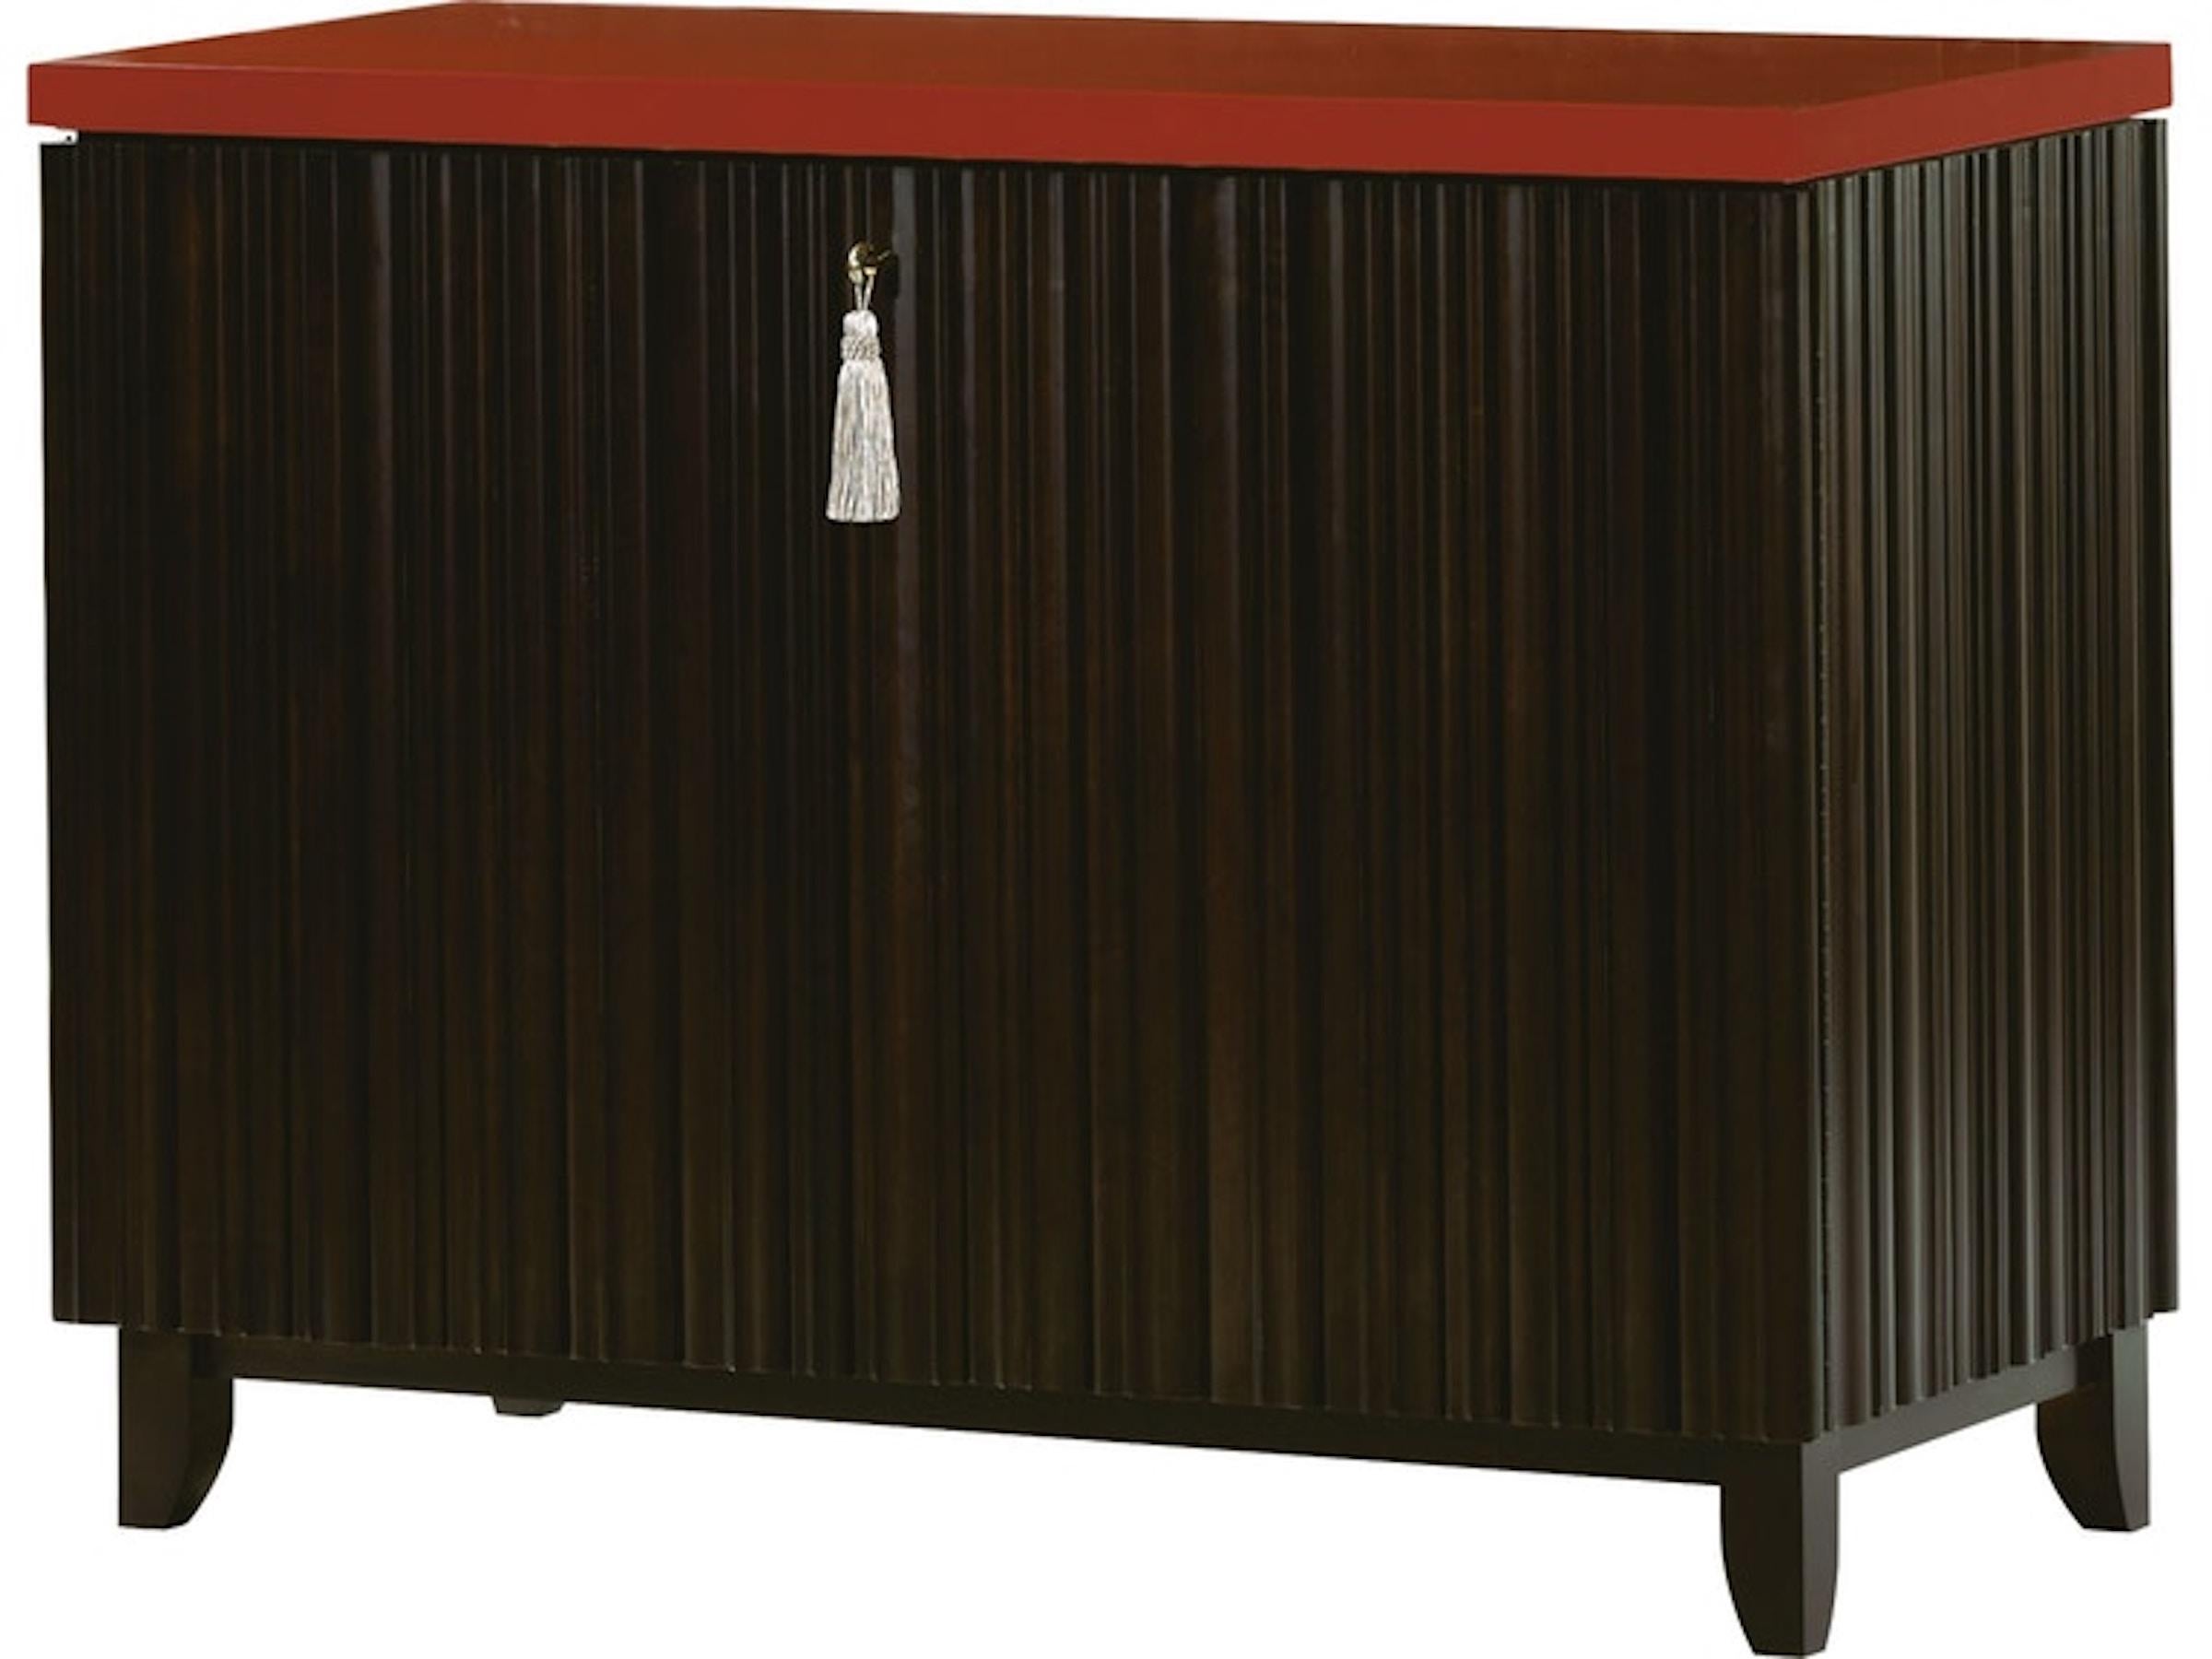 Baker L'eau commode by Laura Kirar No. 9128
Baker commode designed by Laura Kirar. Stunning subtle sculptural hardwood case with a cinnabar lacquer top finished in cinnabar. Complete with Kirar's signature gray silk tassel. The interior is fitted